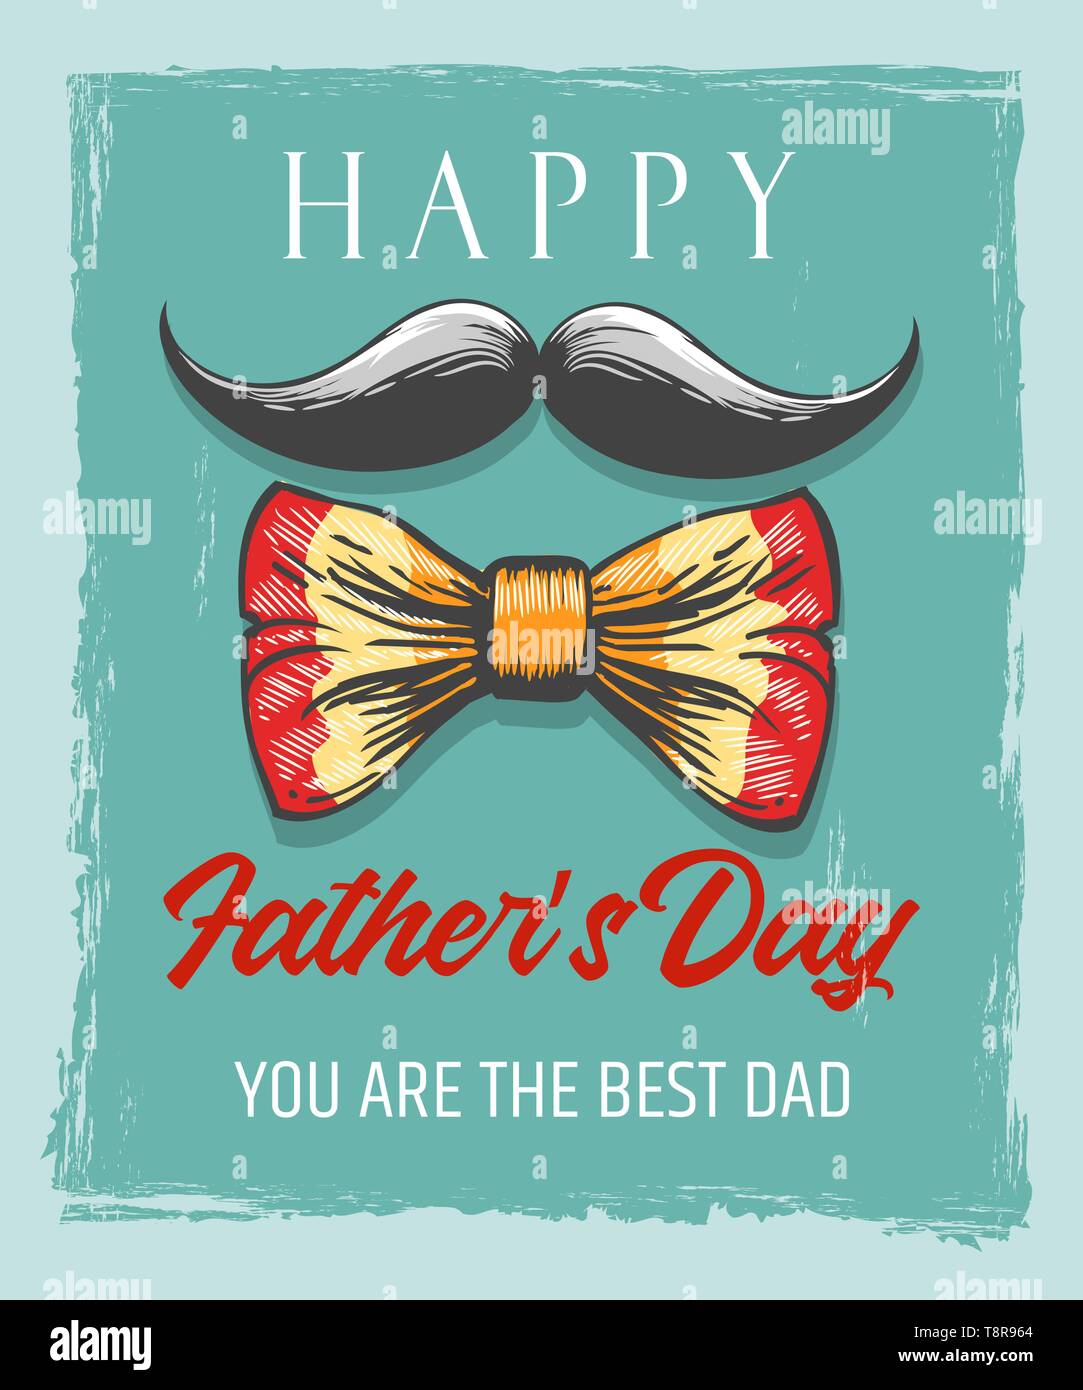 Happy fathers day Retro Poster on grunge background. Moustache and bow tie with letterings. Desing for celebration card. Vector illustration Stock Vector